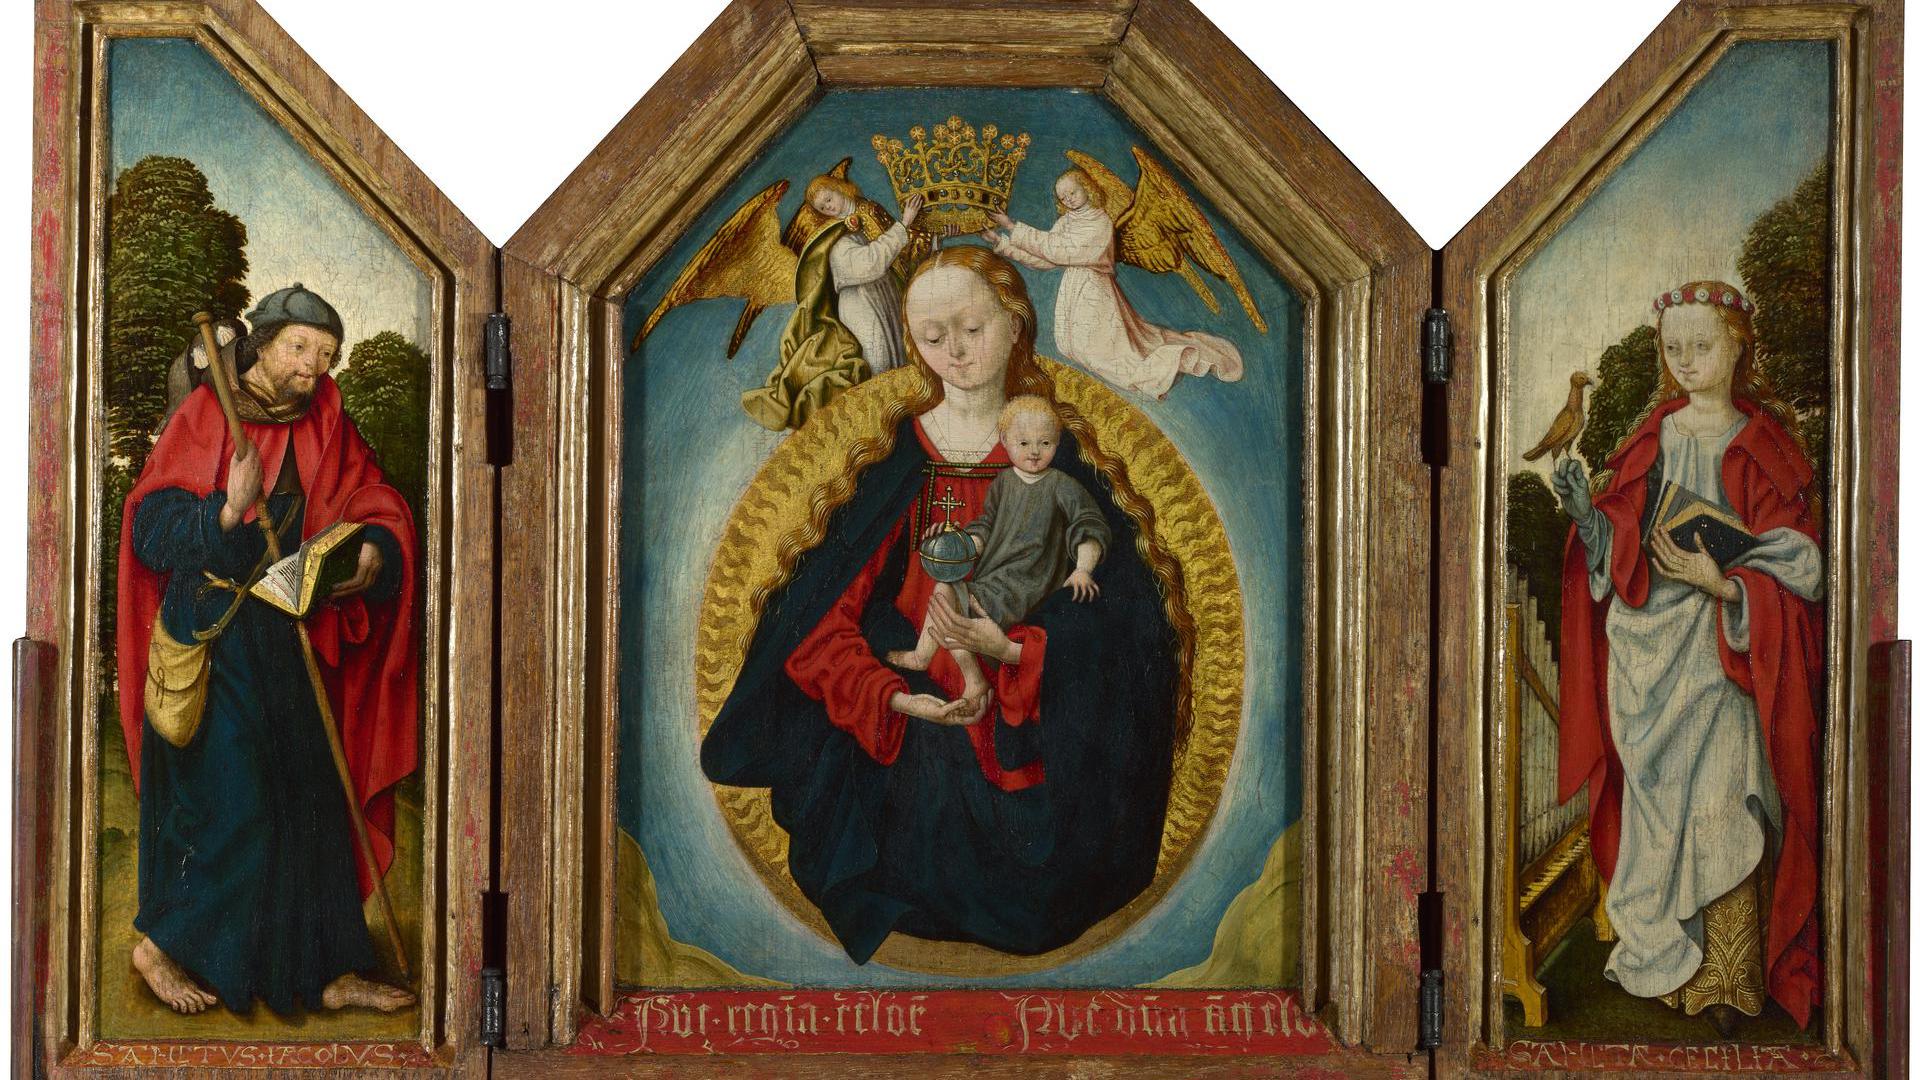 The Virgin and Child in Glory with Saints by Workshop of the Master of the Saint Bartholomew Altarpiece